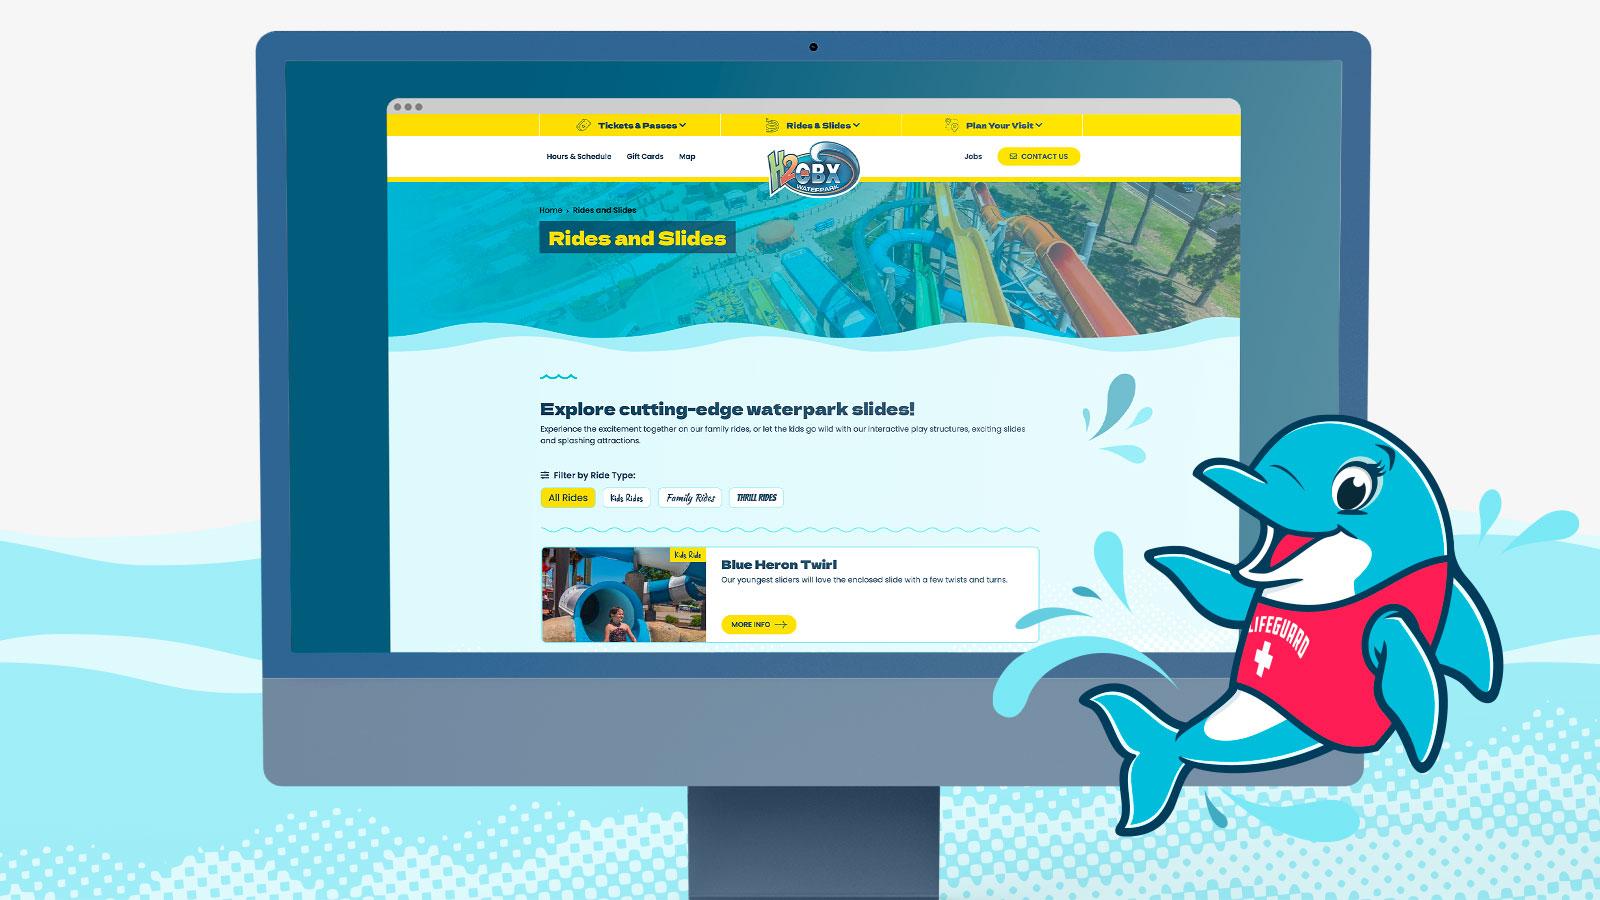 H2OBX Waterpark | Rides and Slides main page